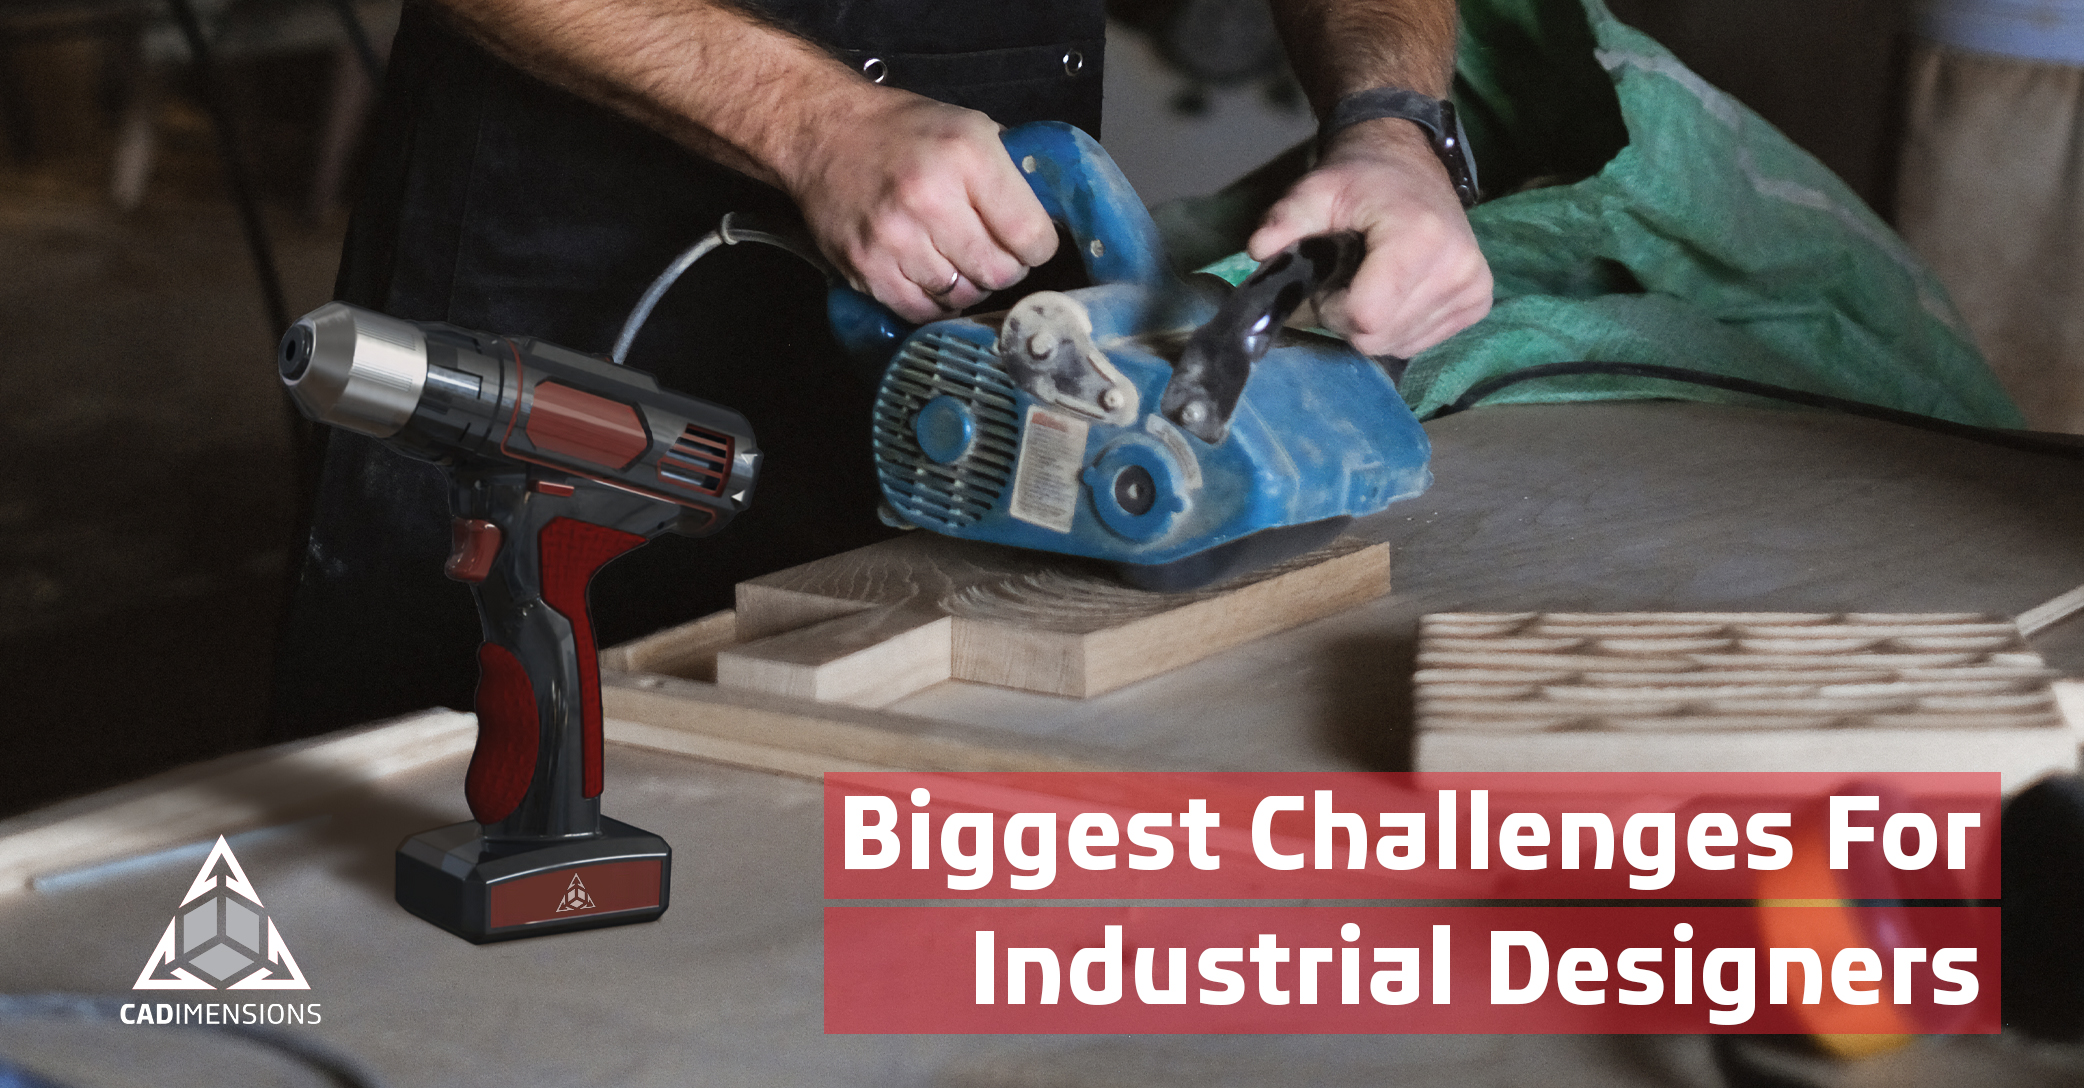 Challenges An Industrial Designer Faces & How to Avoid Them